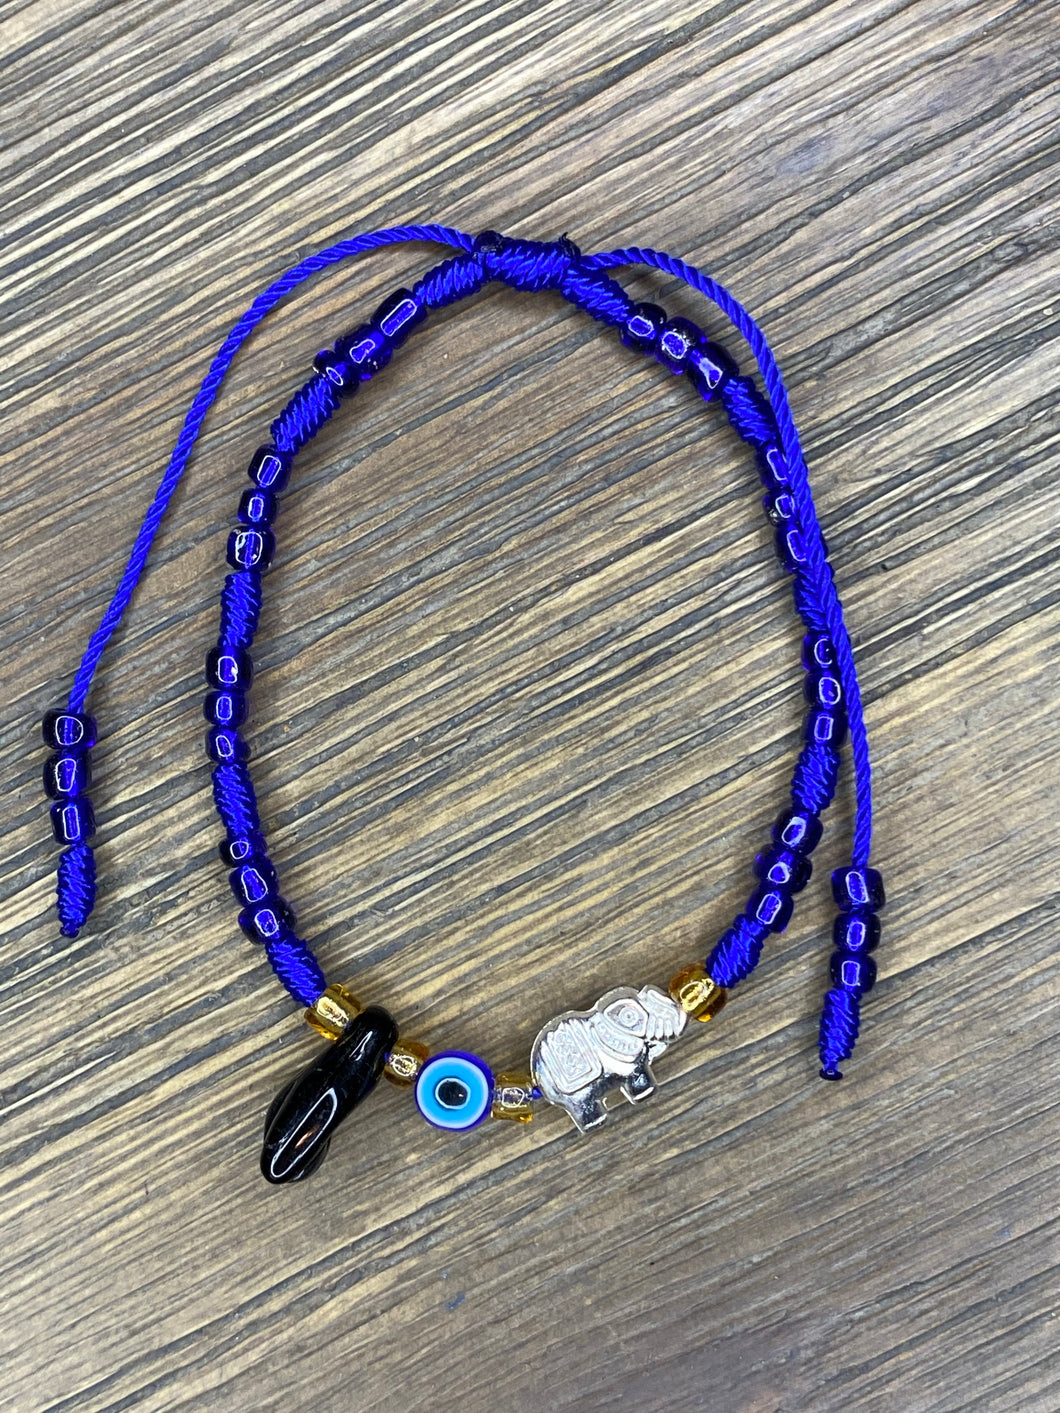 Blue Bracelet With Black Azabache and Charms